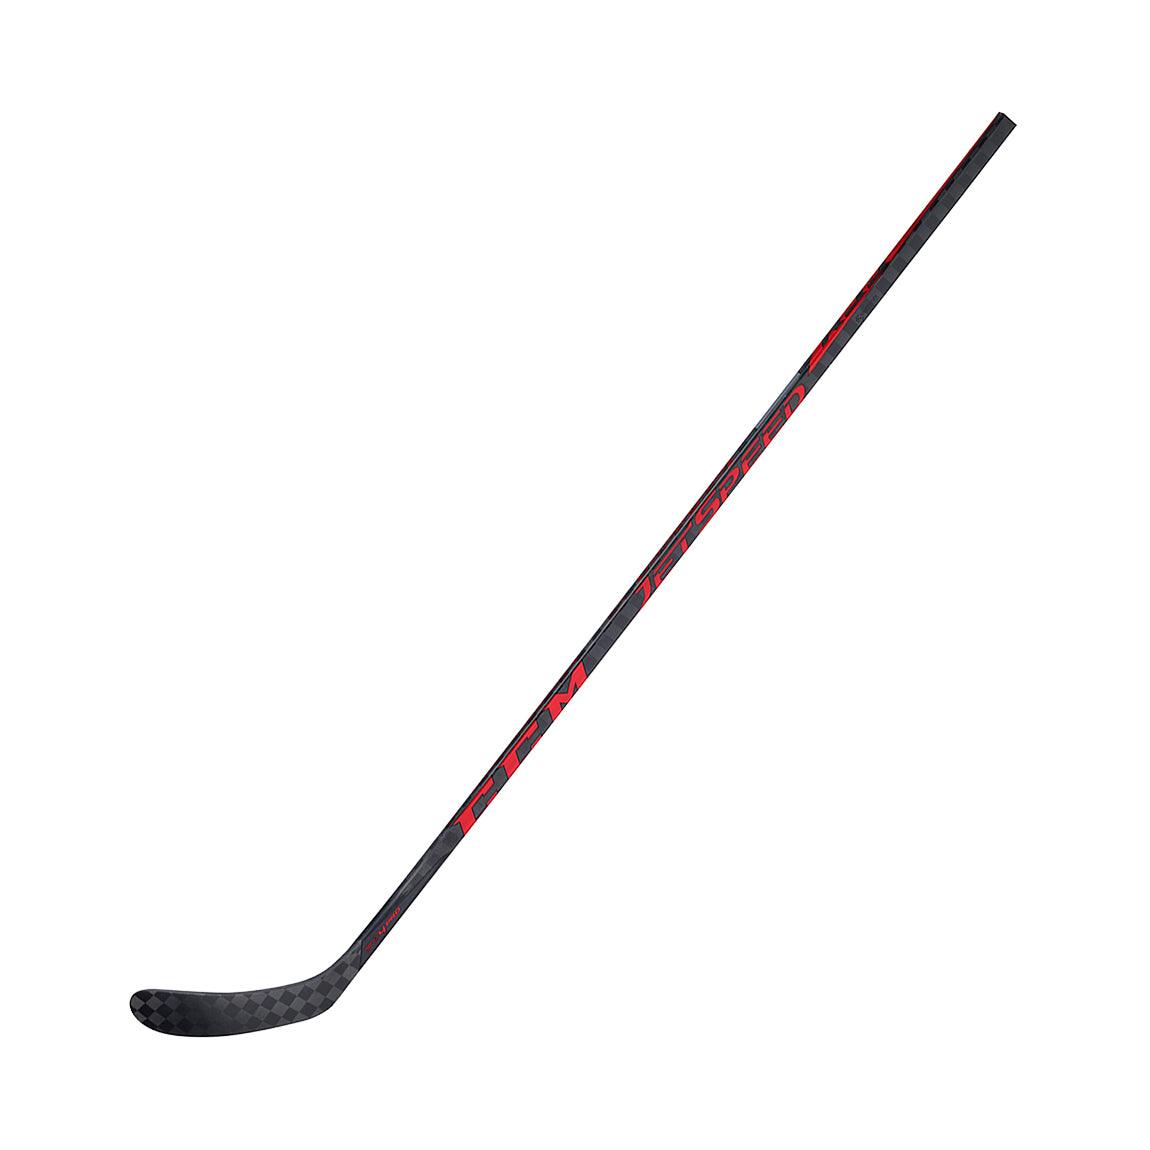 JetSpeed FT4 Pro Grip Hockey Stick - Youth - Sports Excellence